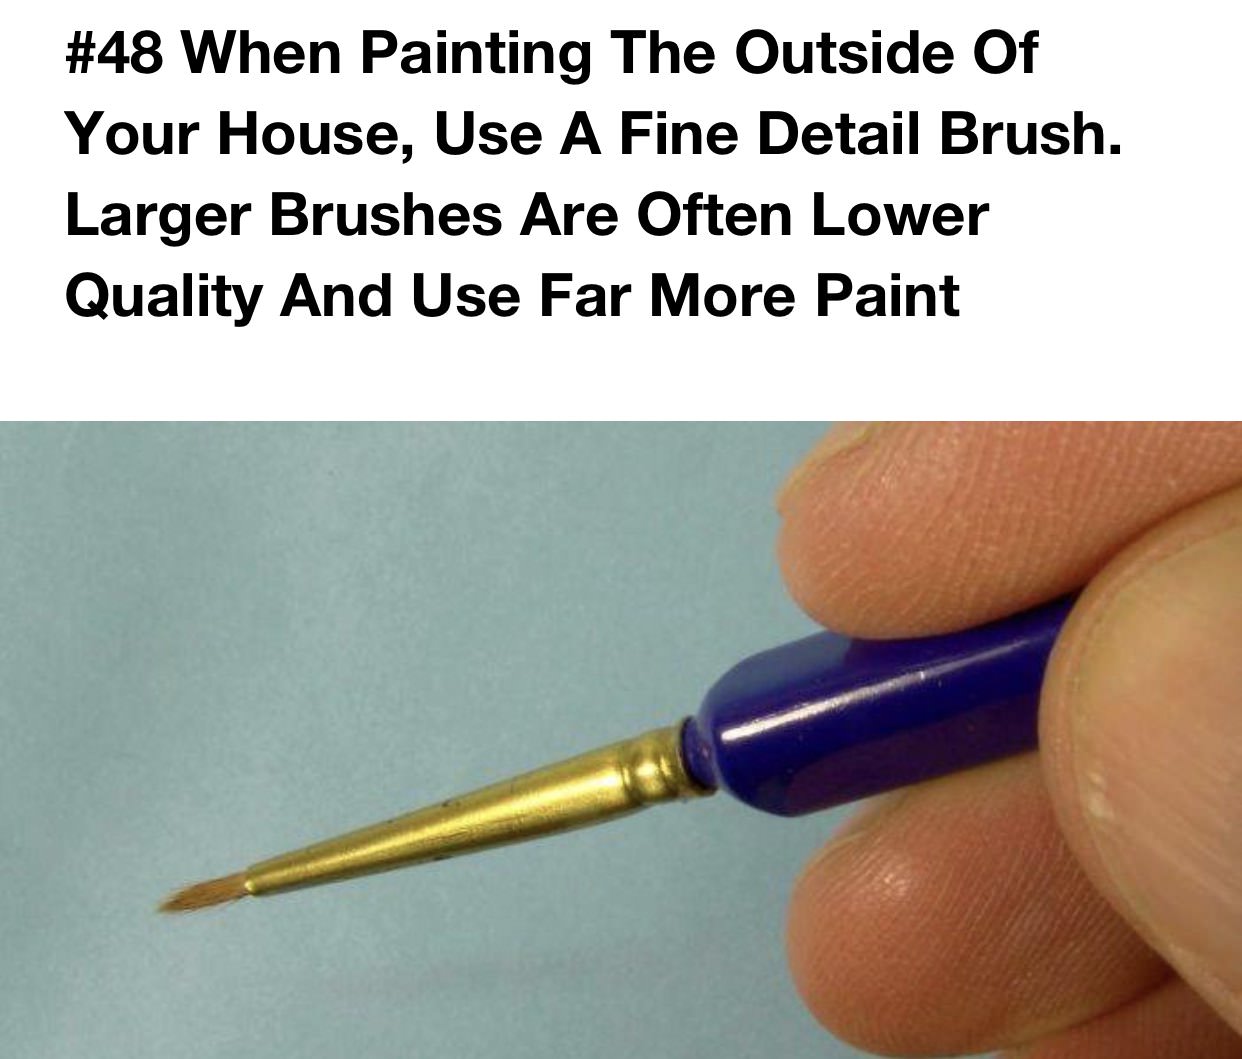 good life hacks - When Painting The Outside Of Your House, Use A Fine Detail Brush. Larger Brushes Are Often Lower Quality And Use Far More Paint